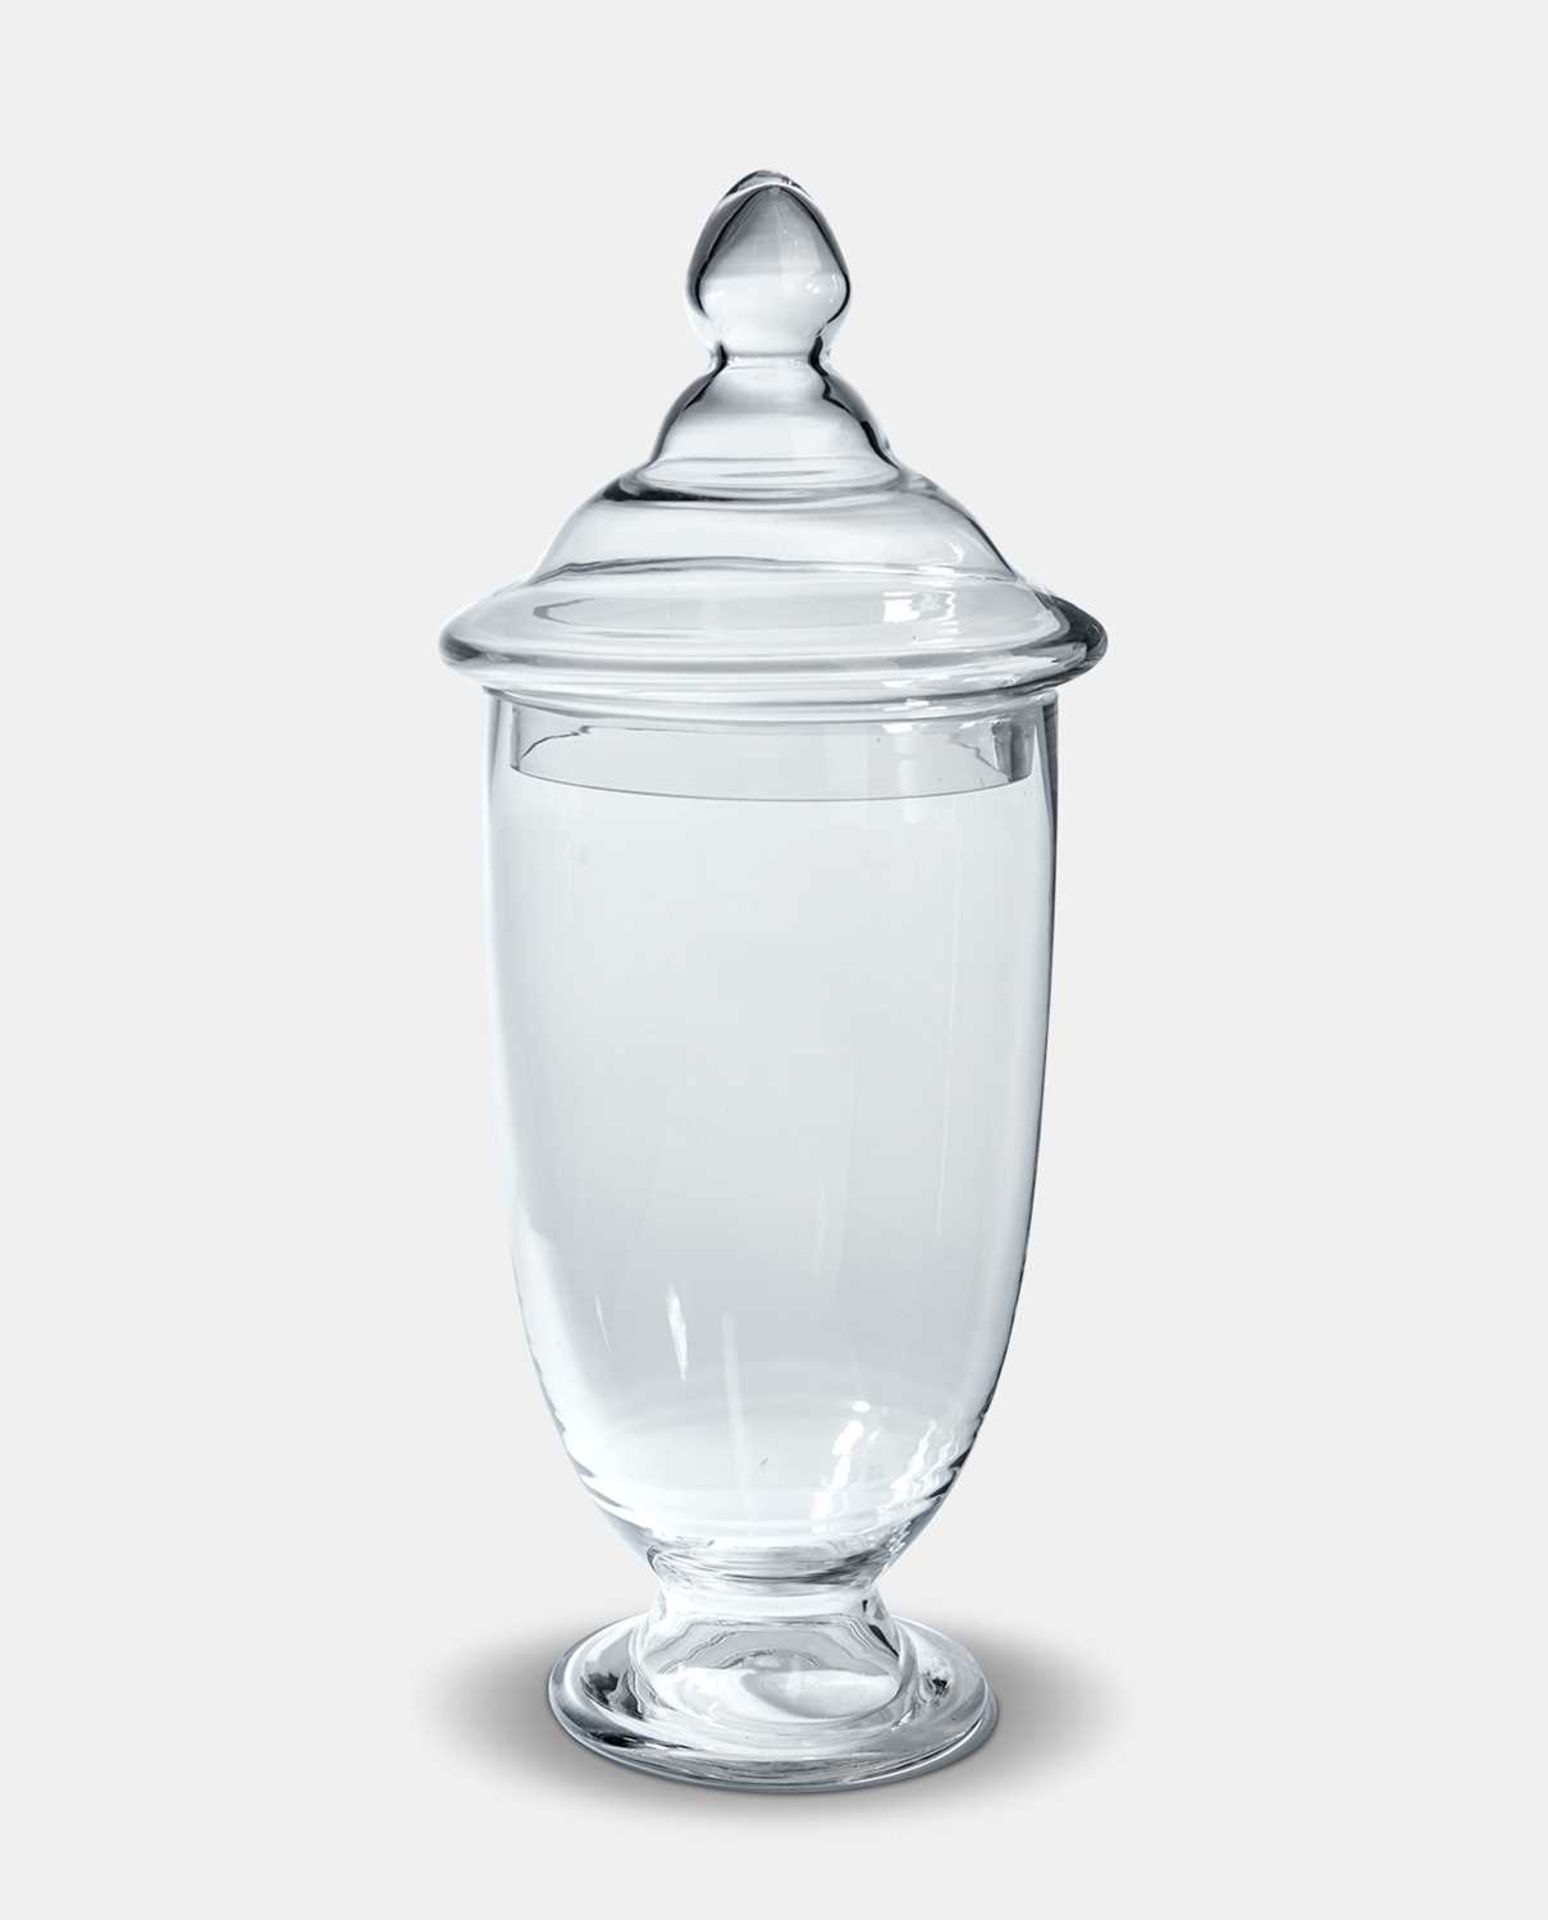 +VAT Pallet of 30 Cartons of 2, (a total of 60) No47 17 x 47cm Glass Apothecary Jar - 180103